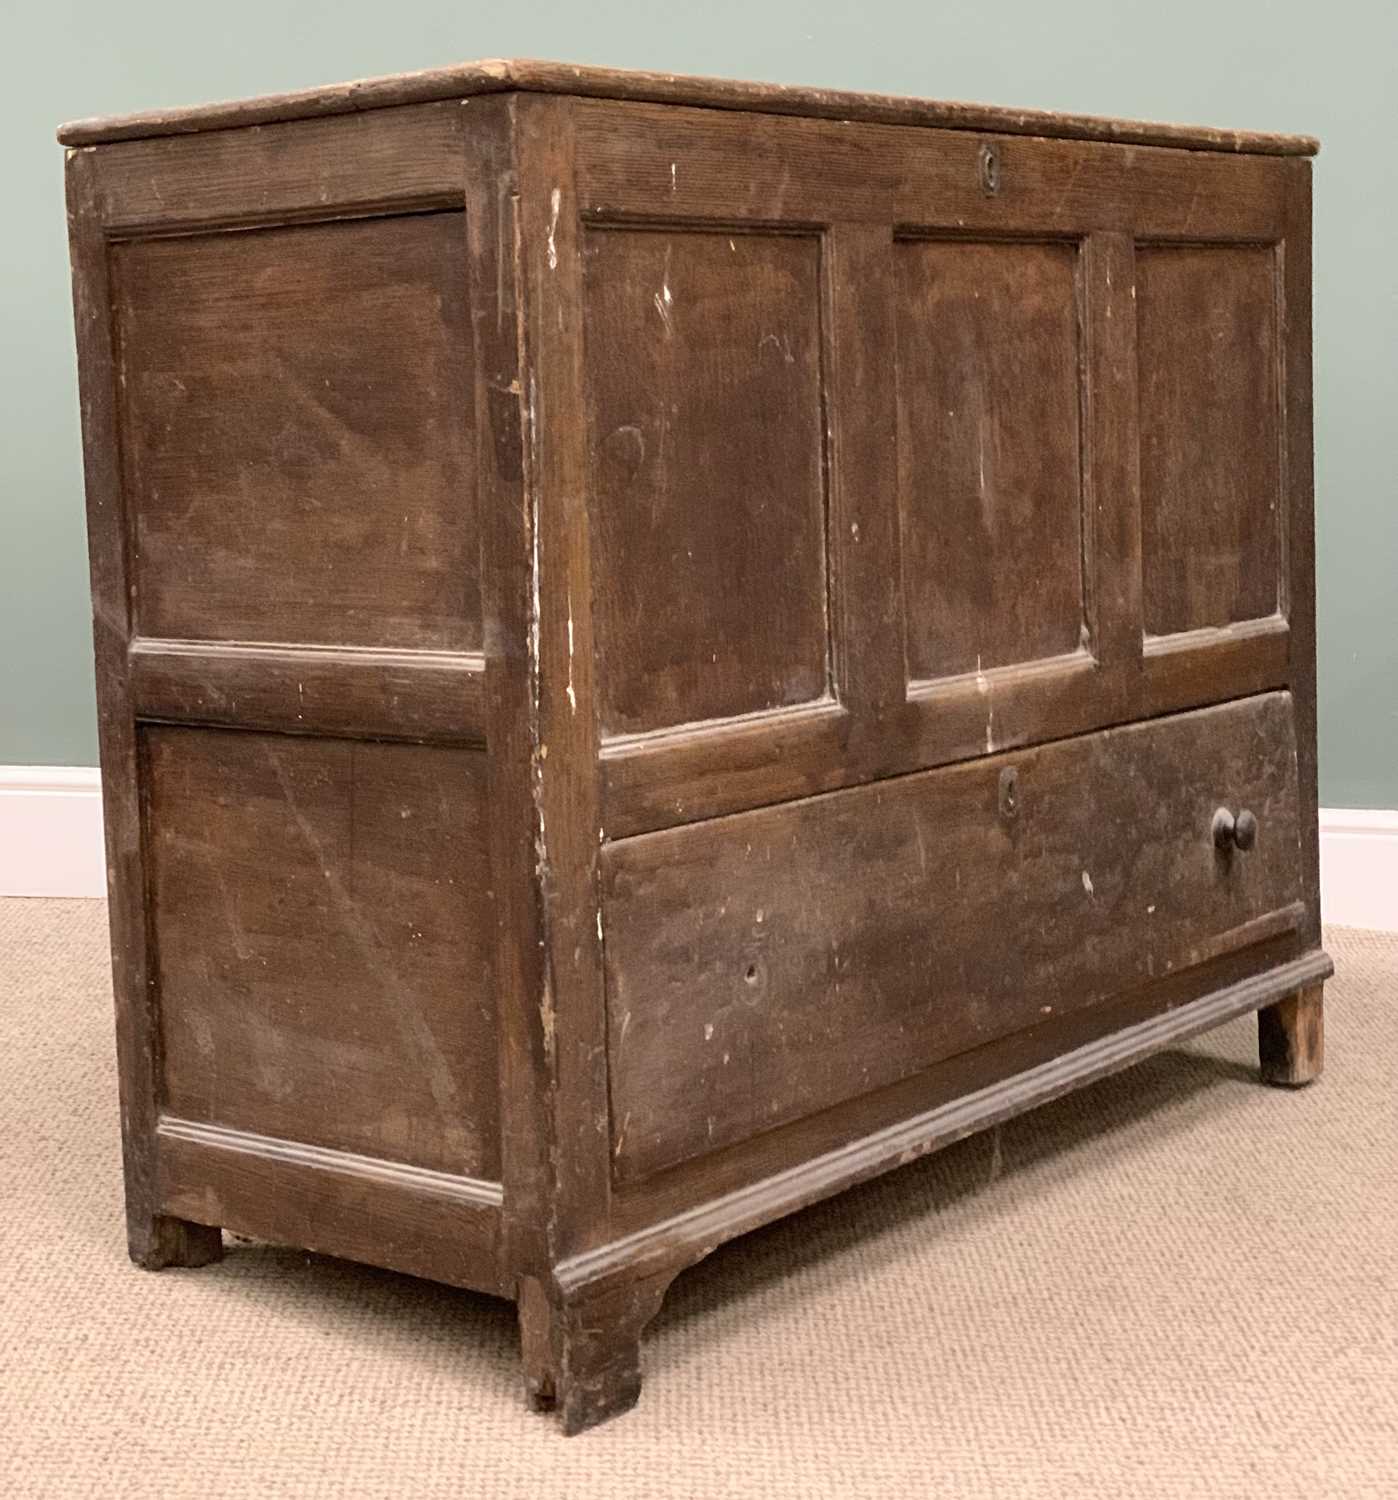 WELSH SCUMBLED PINE MULE CHEST. 19th Century, three recess panels above base drawer, 100 (h) x - Image 4 of 5